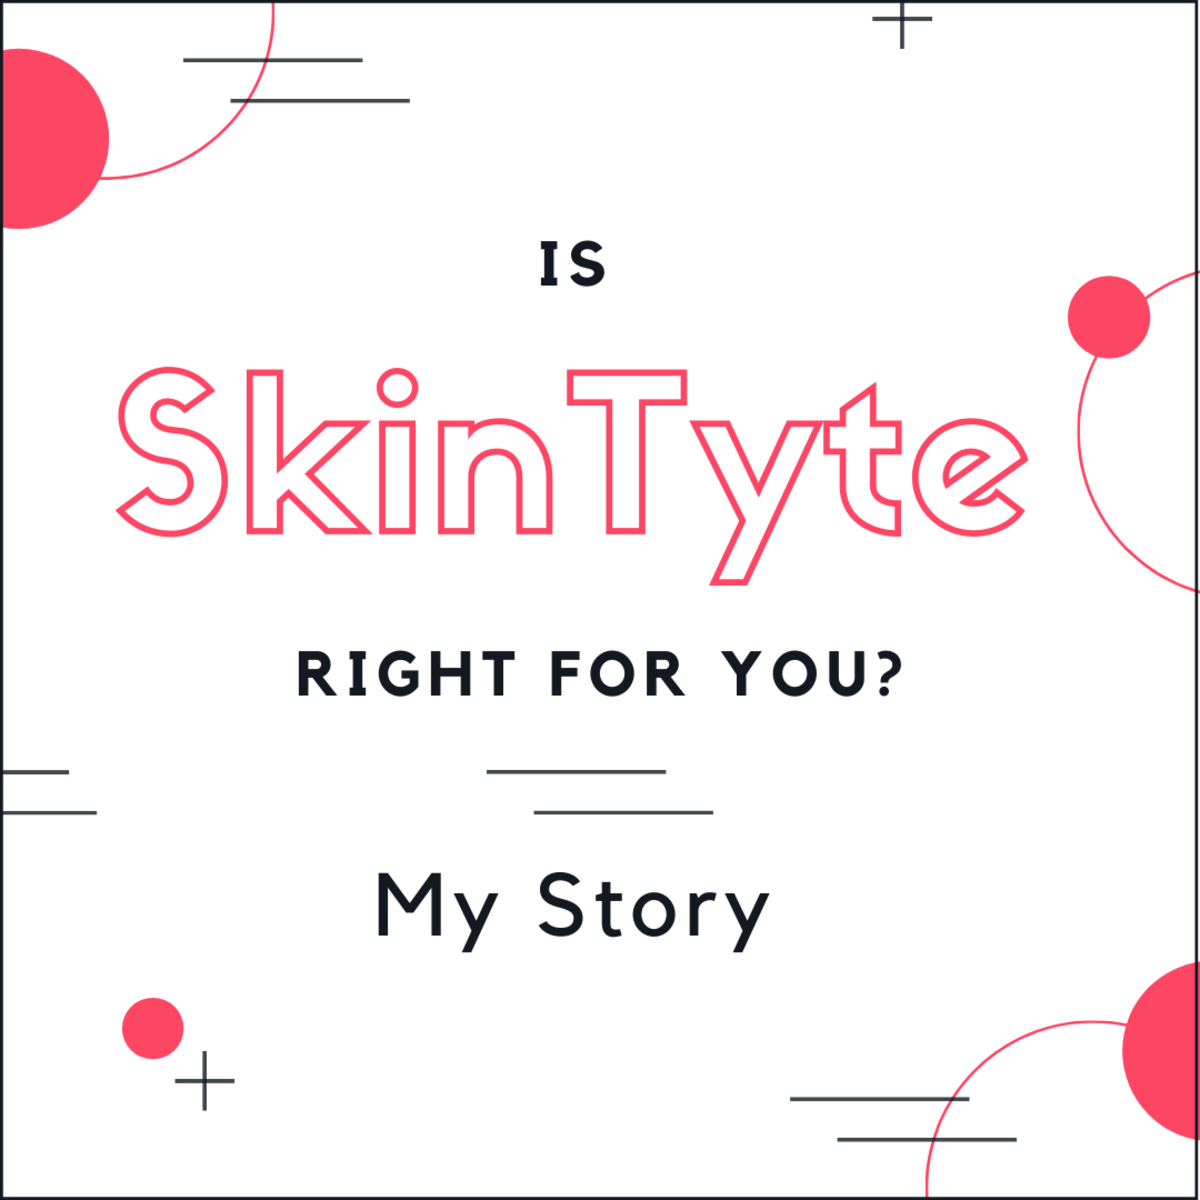 After researching skin-tightening procedures, I went with SkinTyte, and I'm glad I did. 